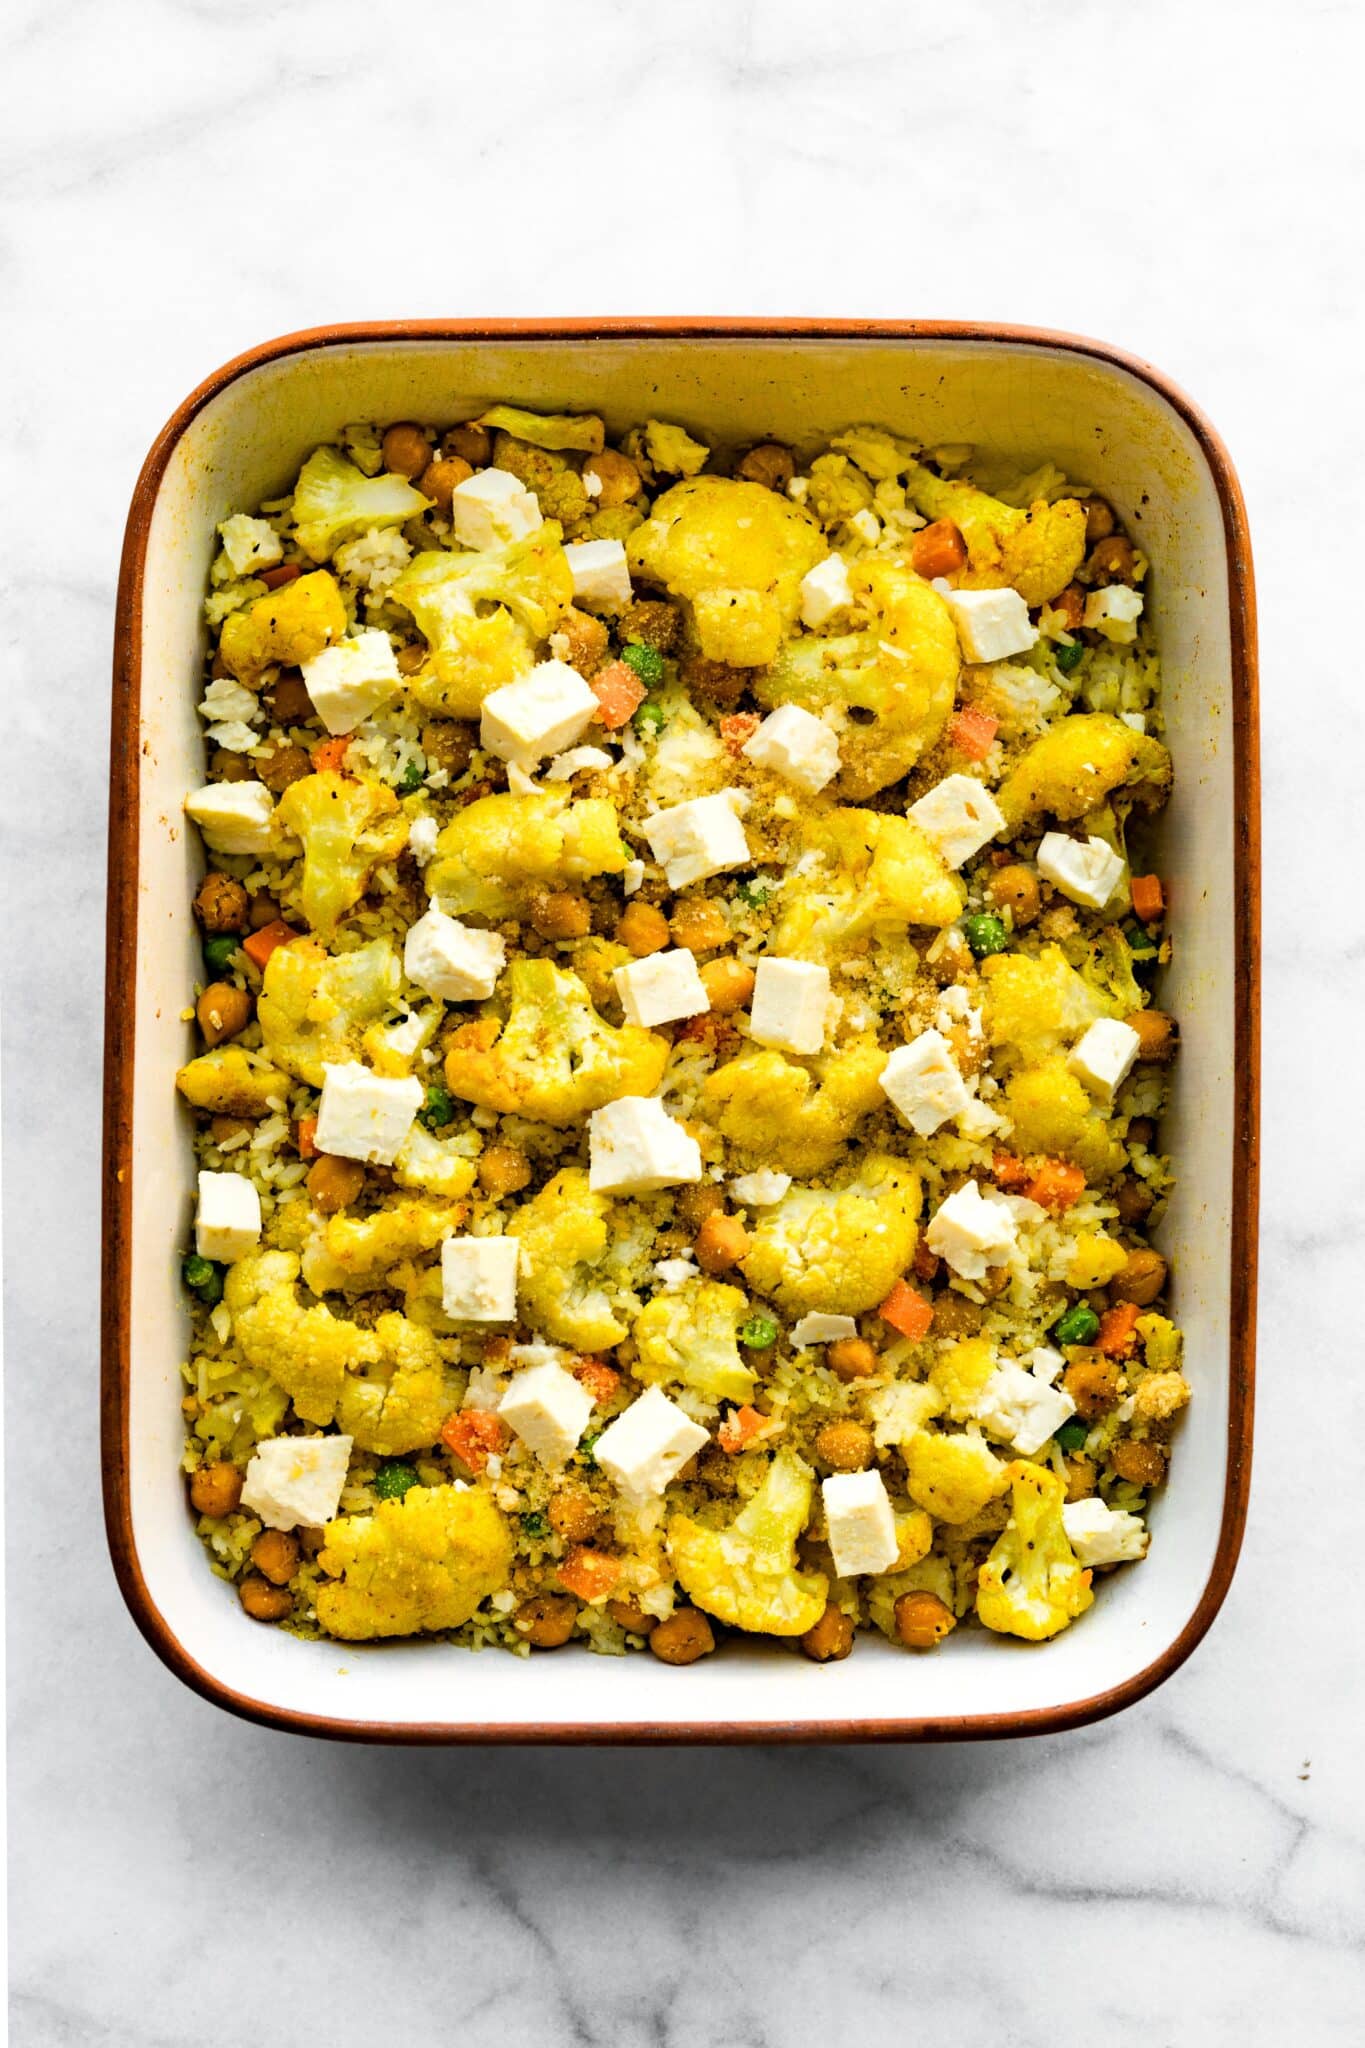 Baked gluten free curried cauliflower with chickpeas in a pan topped with cubed feta cheese.